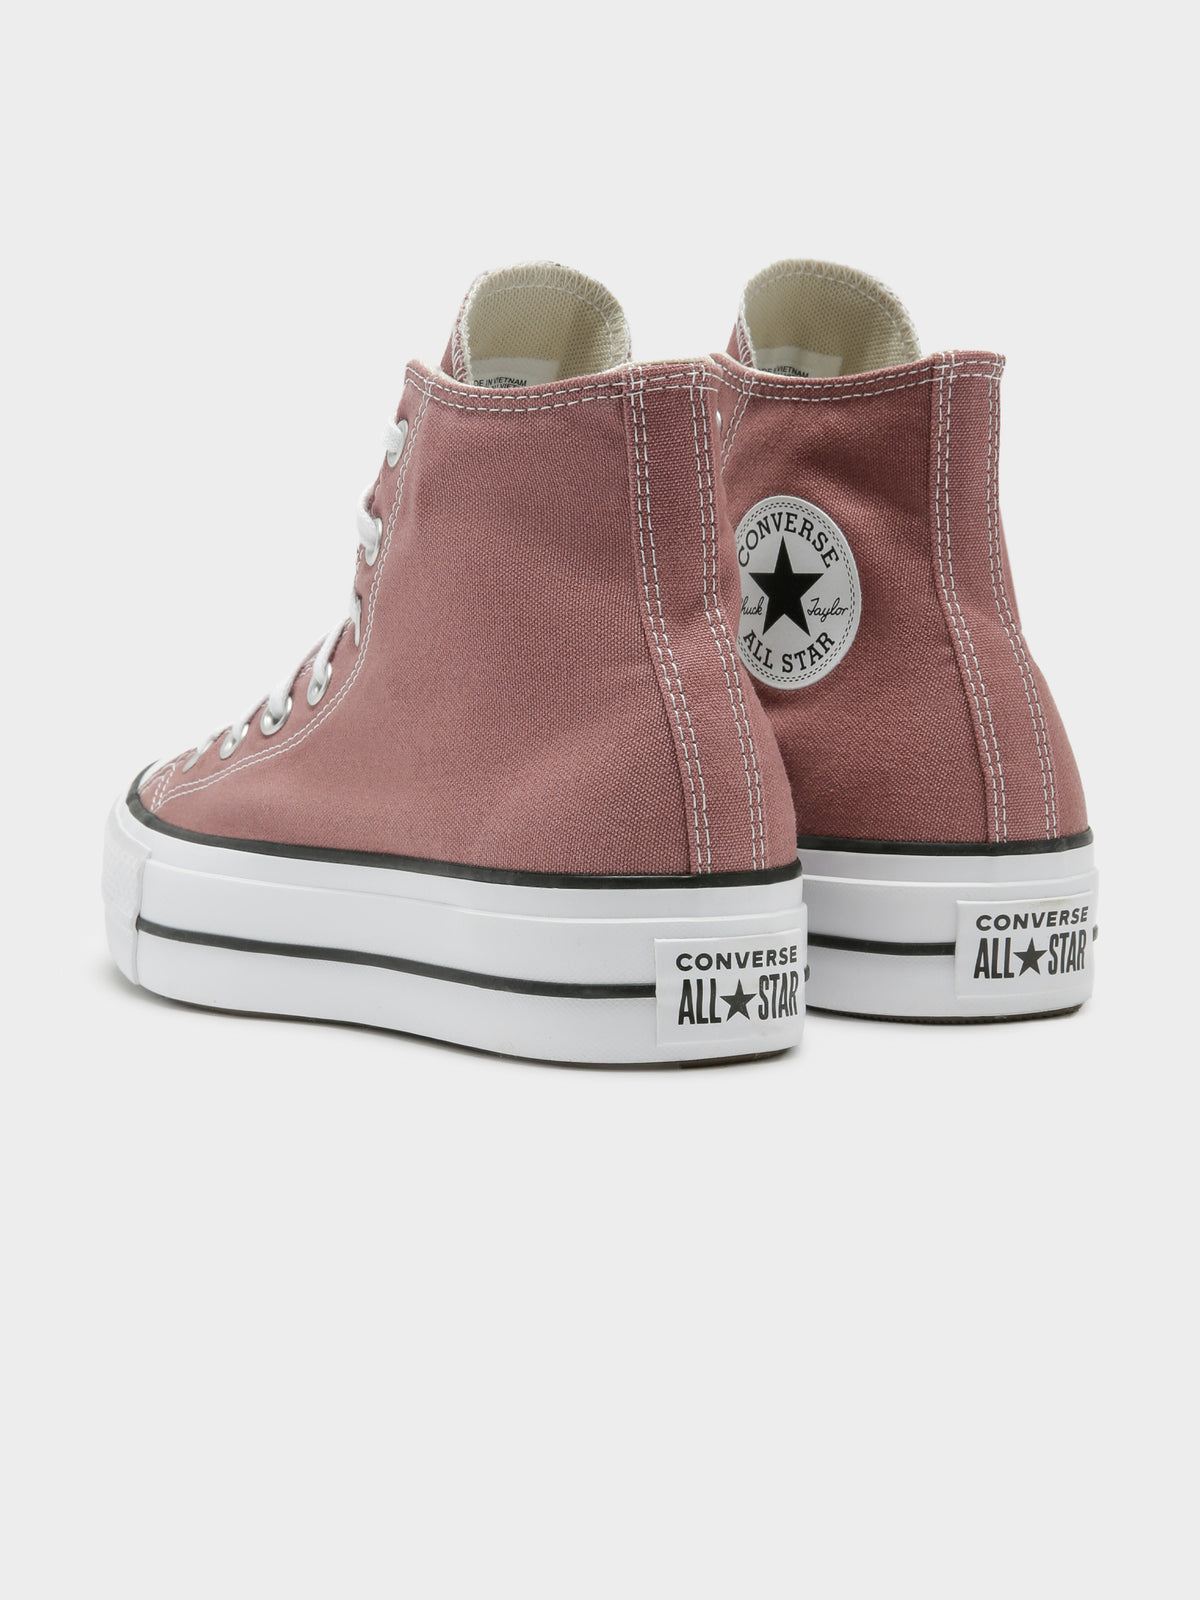 Womens Chuck Taylor All Star High Top Sneakers in Saddle Brown